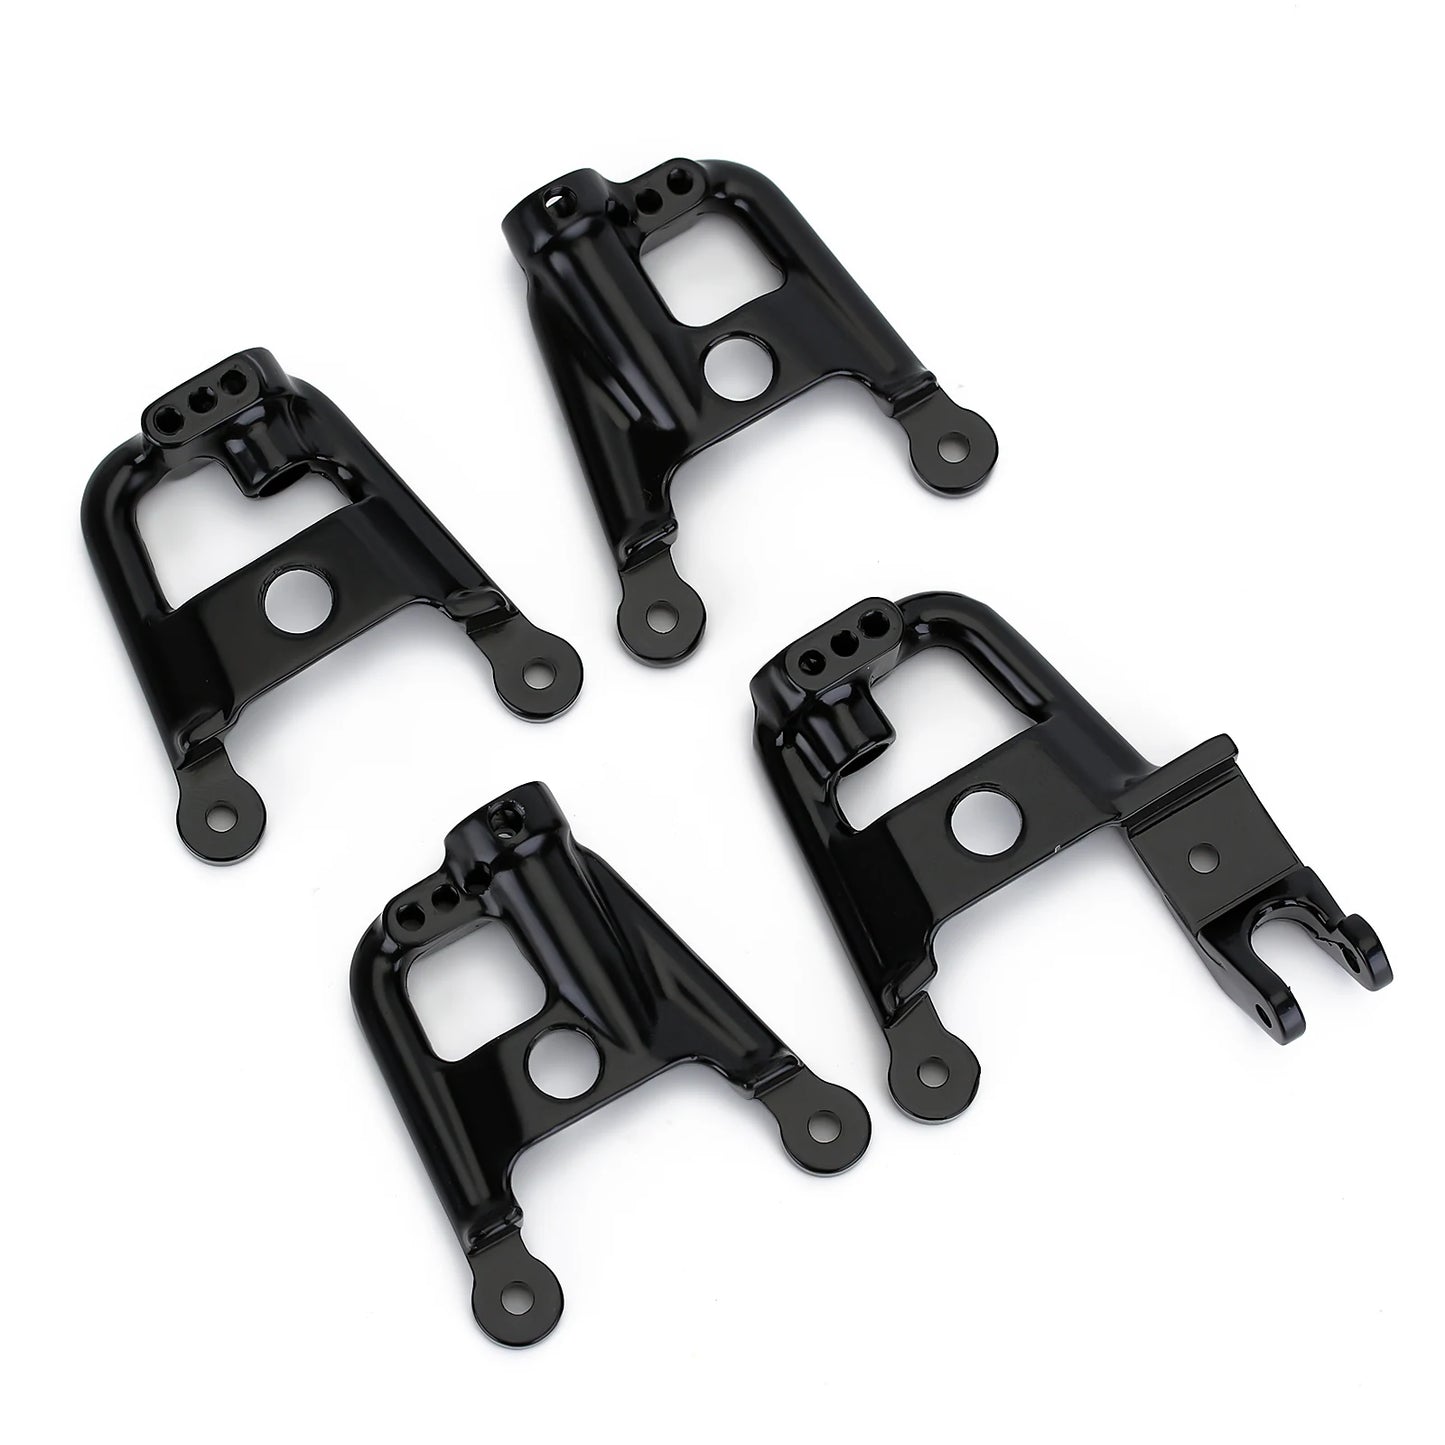 INJORA Heavy Duty Metal Front & Rear Shock Towers Mount For 1/10 RC Crawler Car Axial SCX10 II 90046 Upgrade Parts